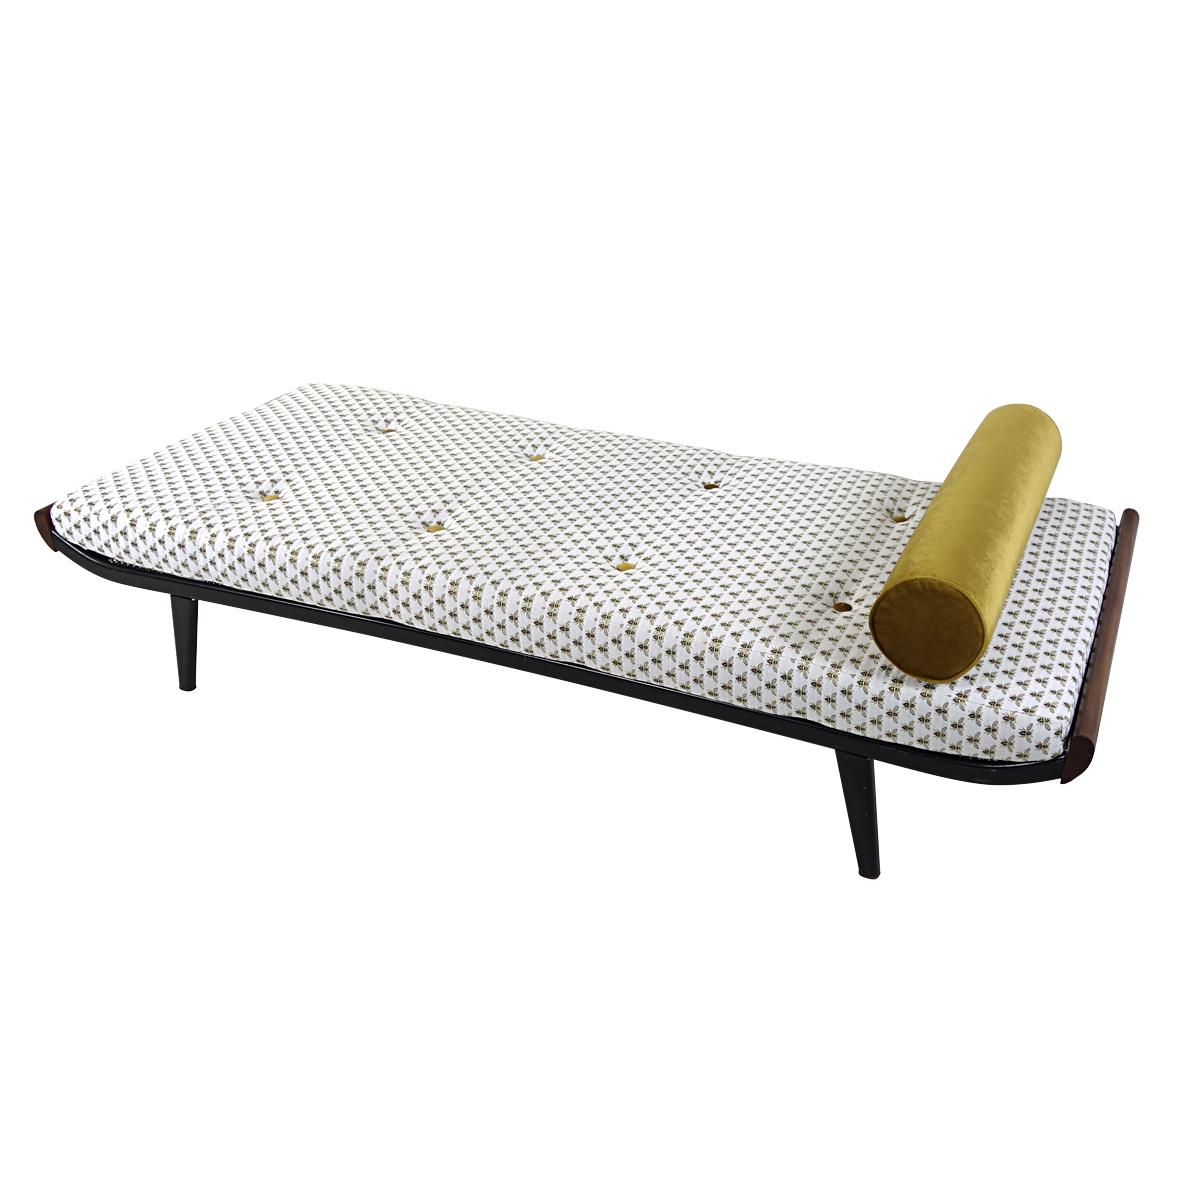 This daybed was designed by Dick Cordemeijer in 1954. It is a beautiful and typical example of Dutch design. The frame is made of black coated metal and the ends are made of solid teak wood. The cushion of course comes withe the bed and the mattress